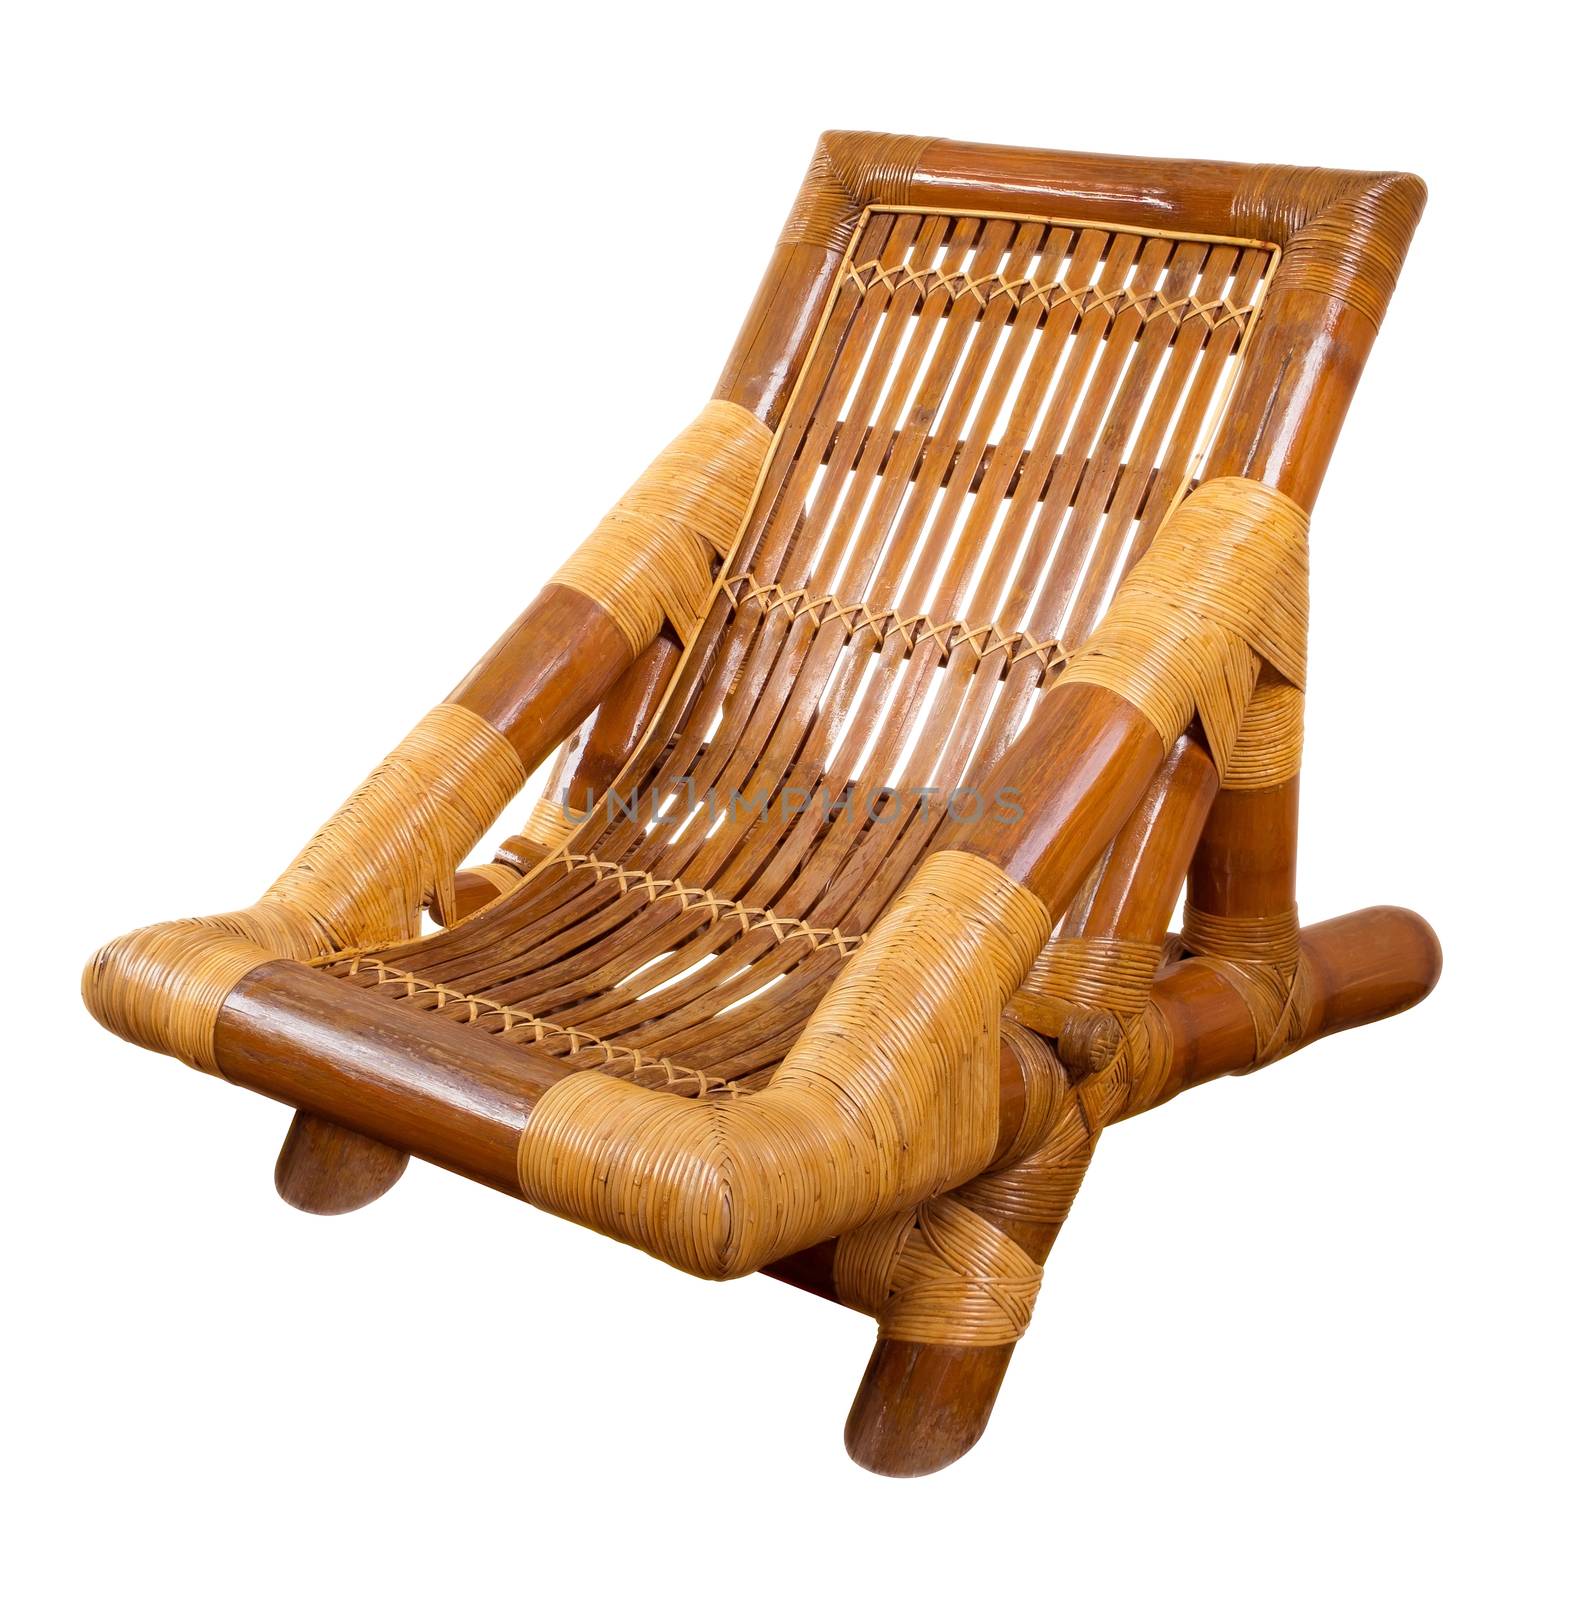 Wooden armchair isolated on white. Clipping path included.